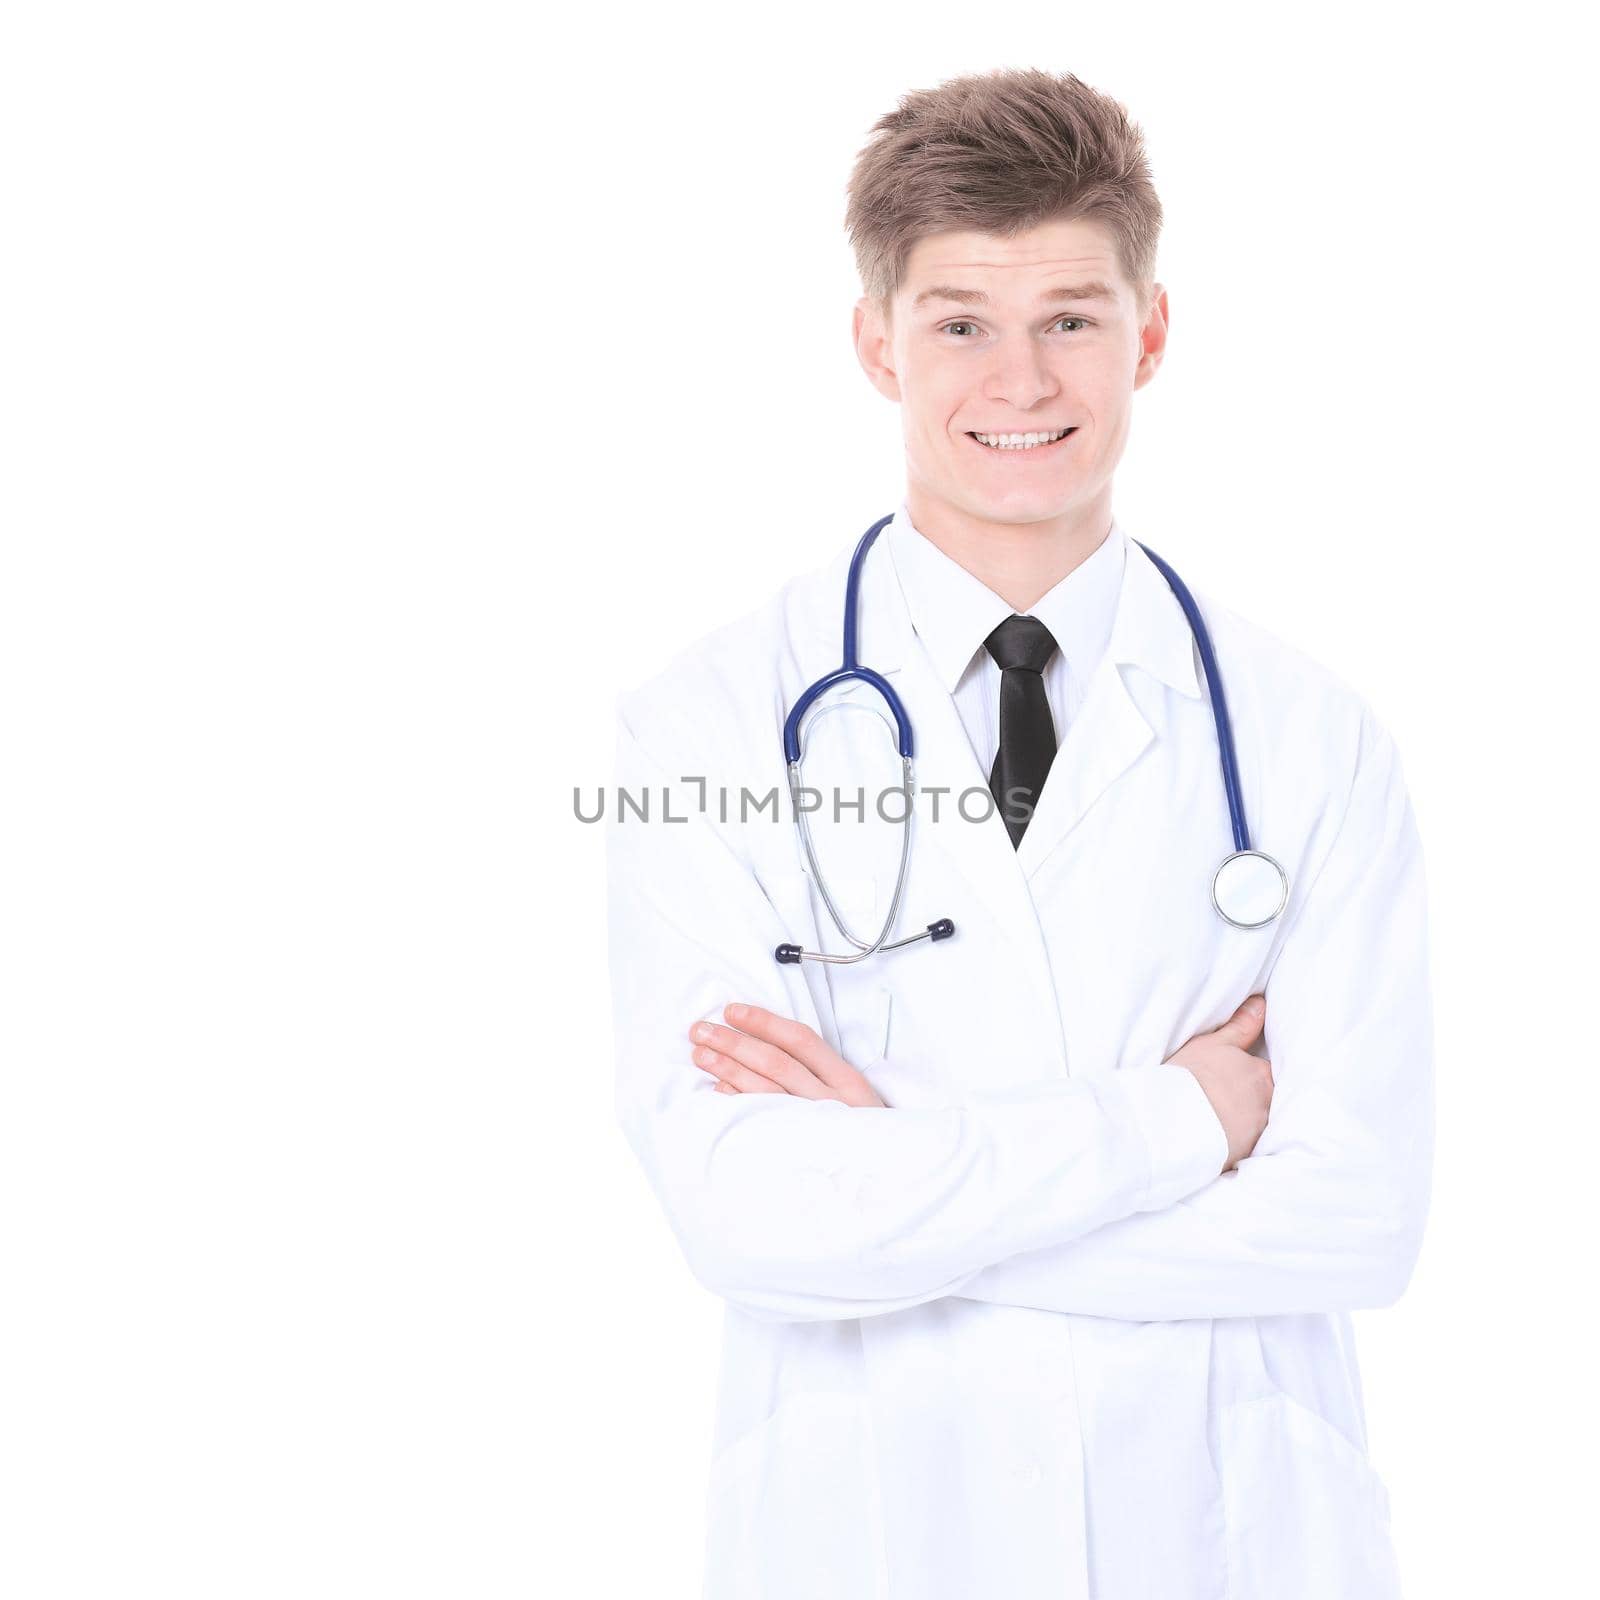 Nice young doctor with a stethoscope isolated on white